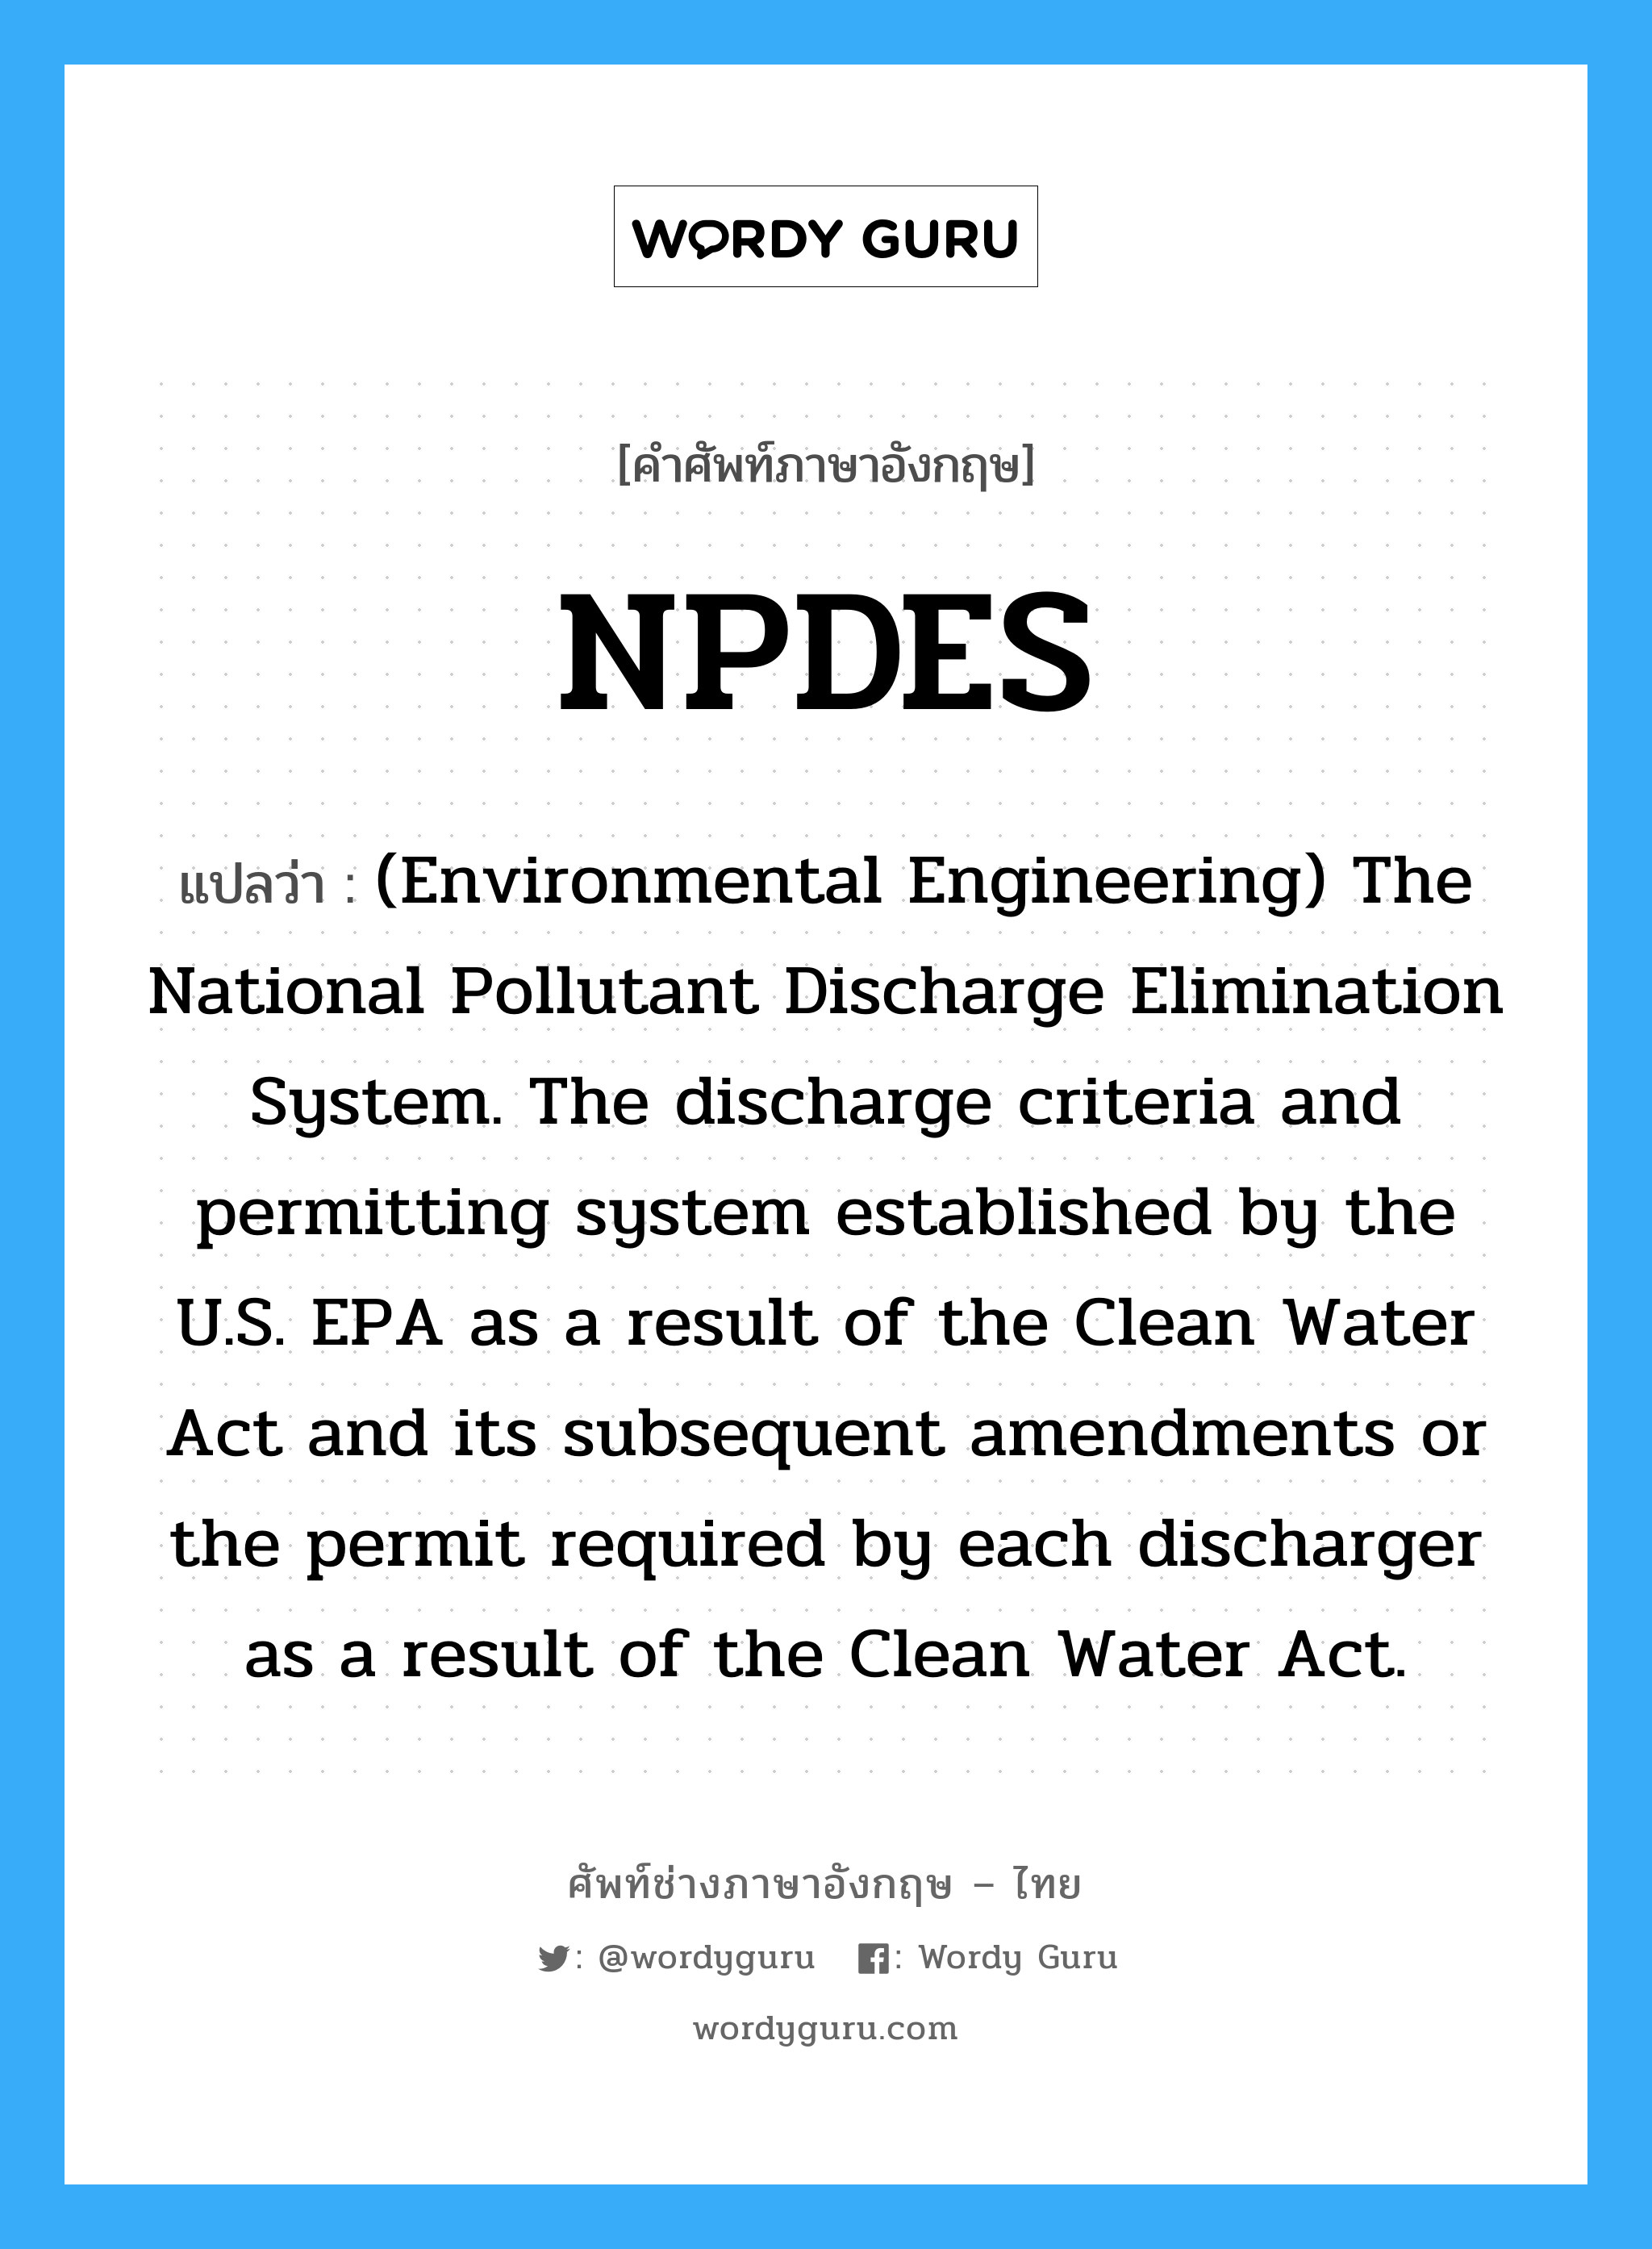 (Environmental Engineering) The National Pollutant Discharge Elimination System. The discharge criteria and permitting system established by the U.S. EPA as a result of the Clean Water Act and its subsequent amendments or the permit required by each discharger as a result of the Clean Water Act. ภาษาอังกฤษ?, คำศัพท์ช่างภาษาอังกฤษ - ไทย (Environmental Engineering) The National Pollutant Discharge Elimination System. The discharge criteria and permitting system established by the U.S. EPA as a result of the Clean Water Act and its subsequent amendments or the permit required by each discharger as a result of the Clean Water Act. คำศัพท์ภาษาอังกฤษ (Environmental Engineering) The National Pollutant Discharge Elimination System. The discharge criteria and permitting system established by the U.S. EPA as a result of the Clean Water Act and its subsequent amendments or the permit required by each discharger as a result of the Clean Water Act. แปลว่า NPDES